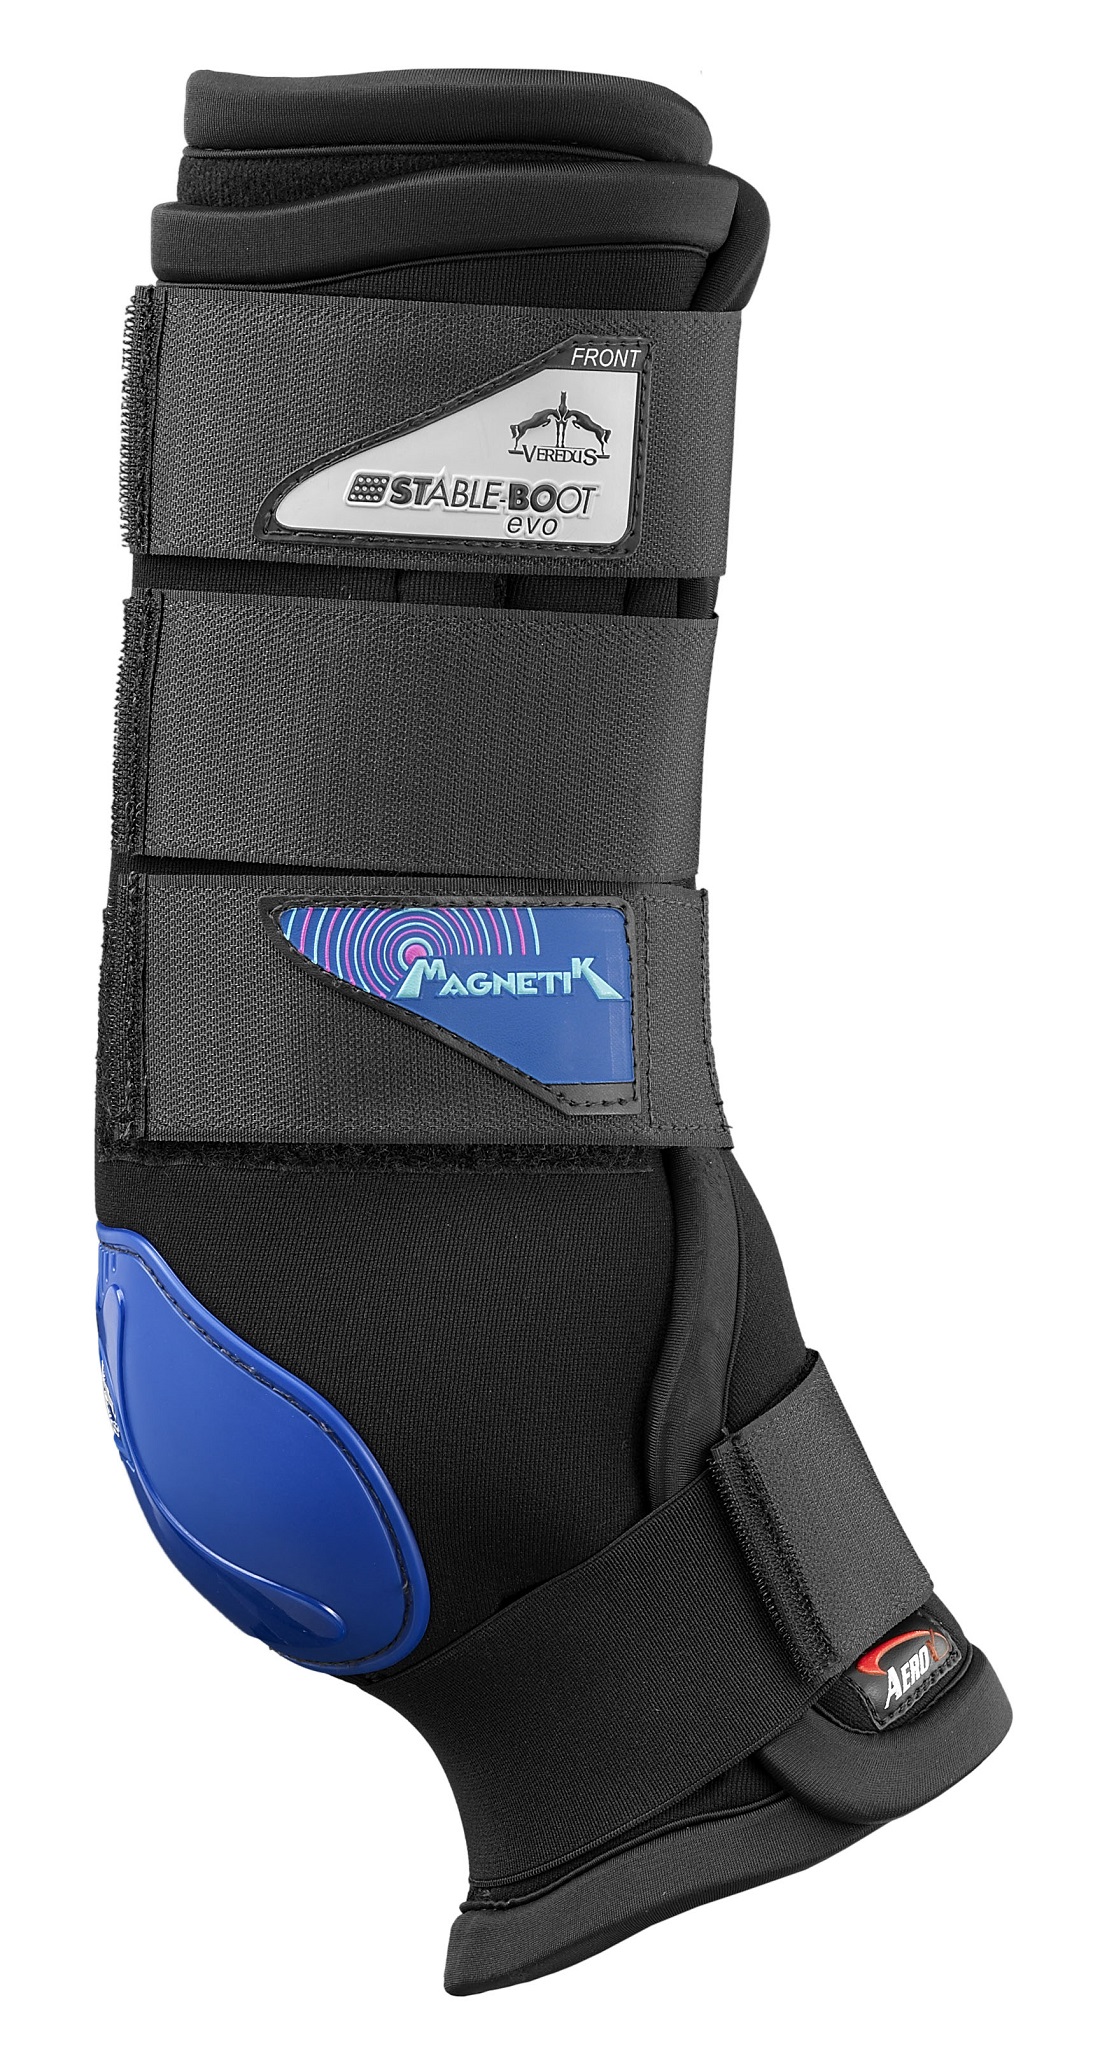 Magnetik Stable Boot Evo Front, Magnet Gamasche